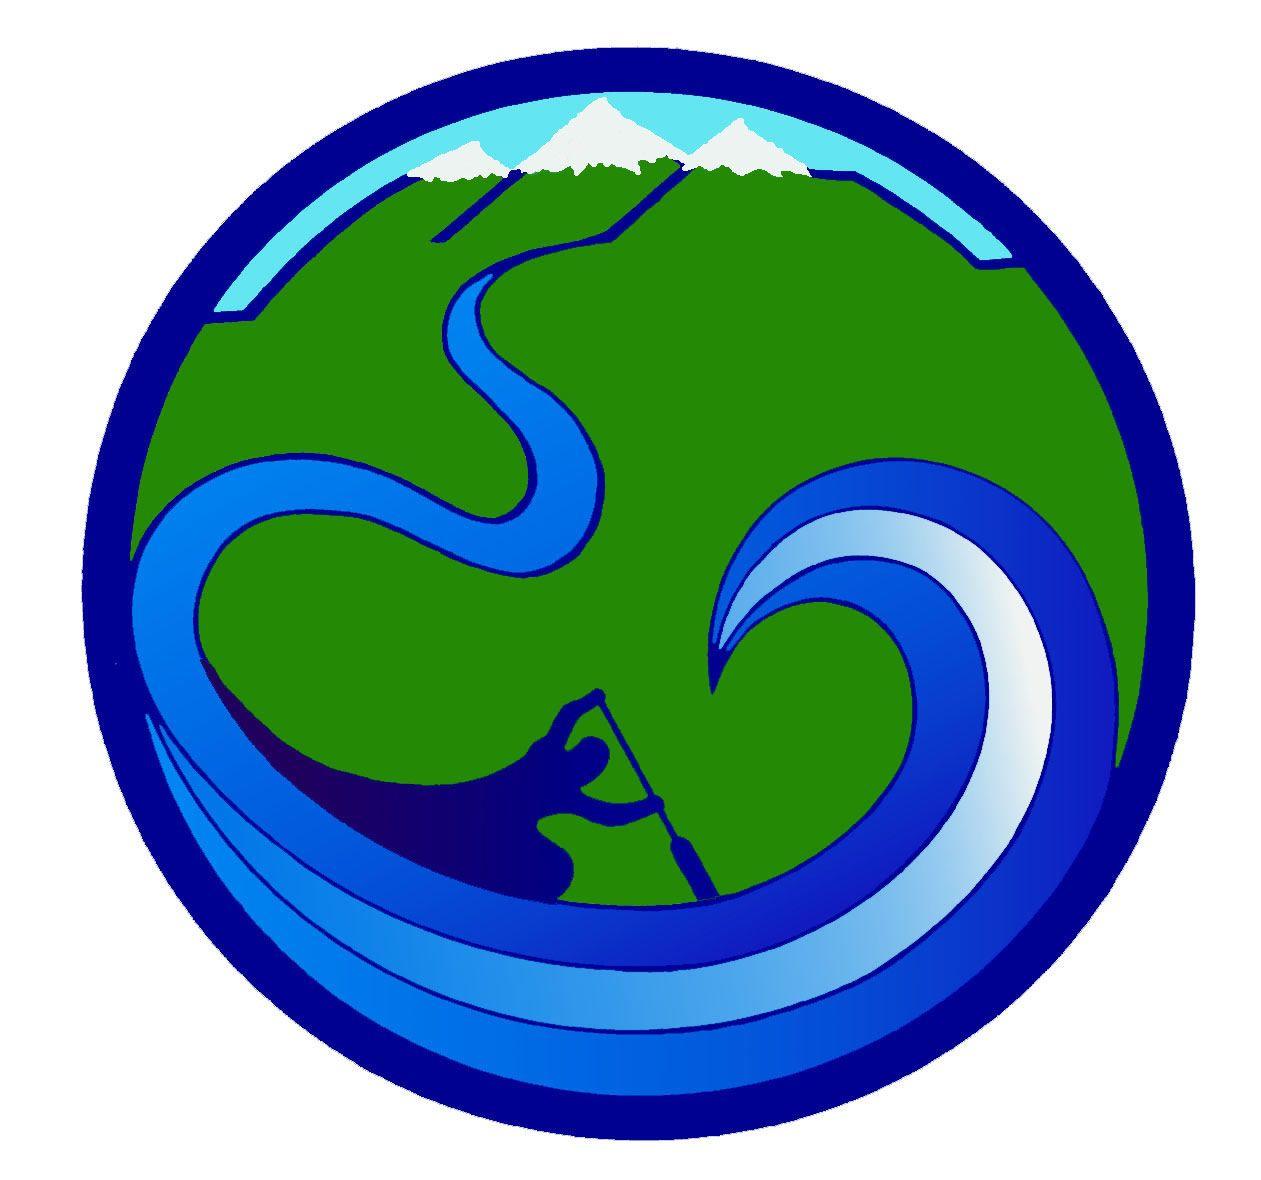 Blue and Green Circle Logo - California Rafting and Whitewater Rafting in California on the ...